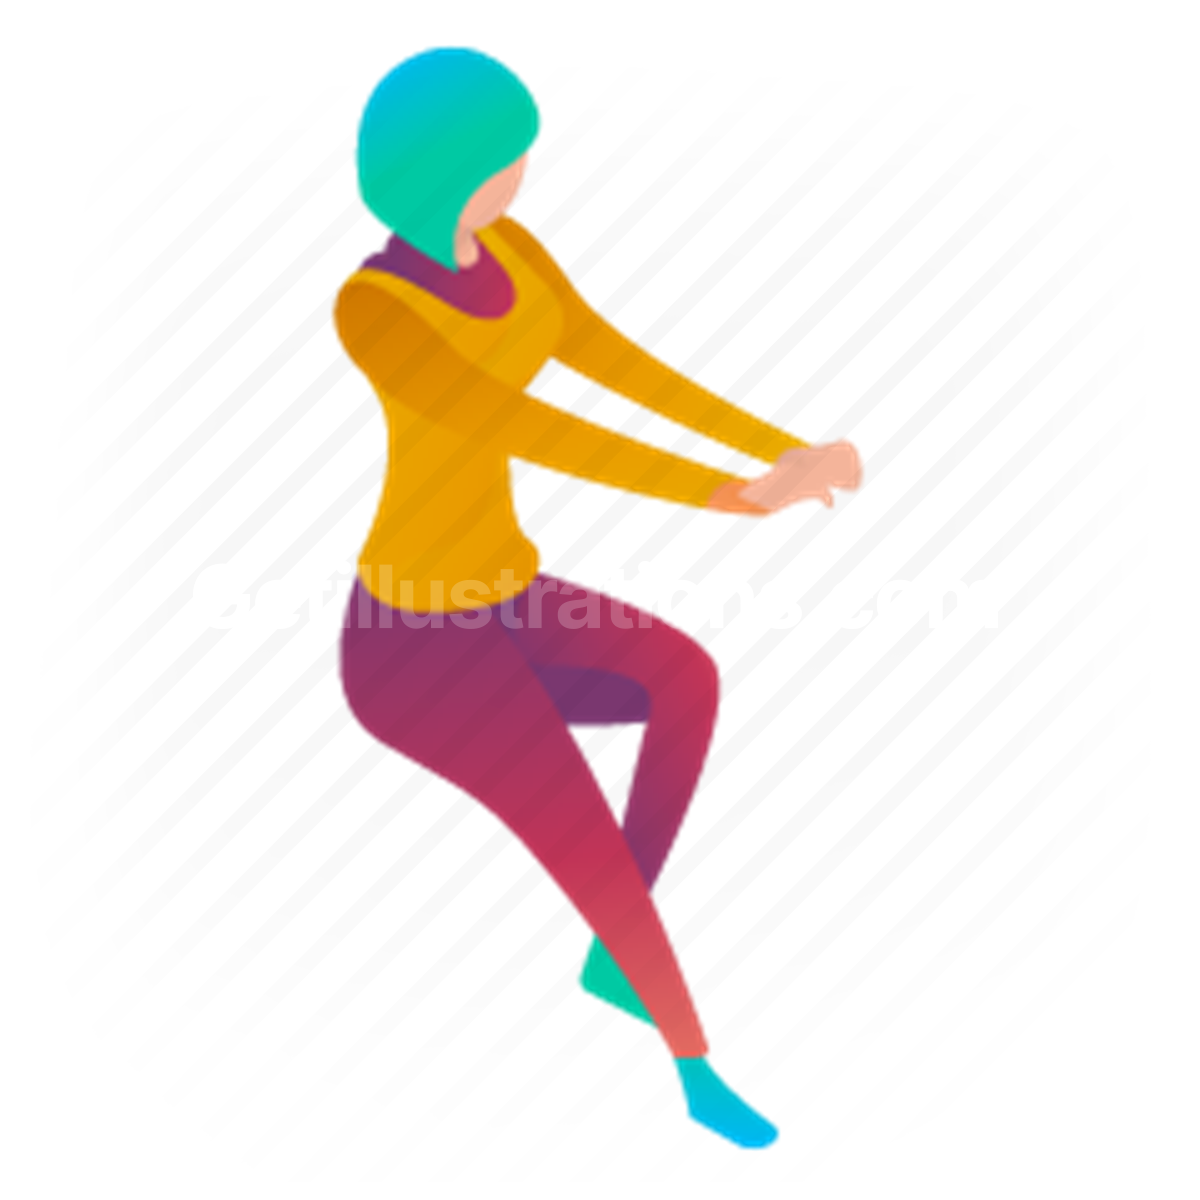 seated, sitting, sit, position, gesture, woman, casual